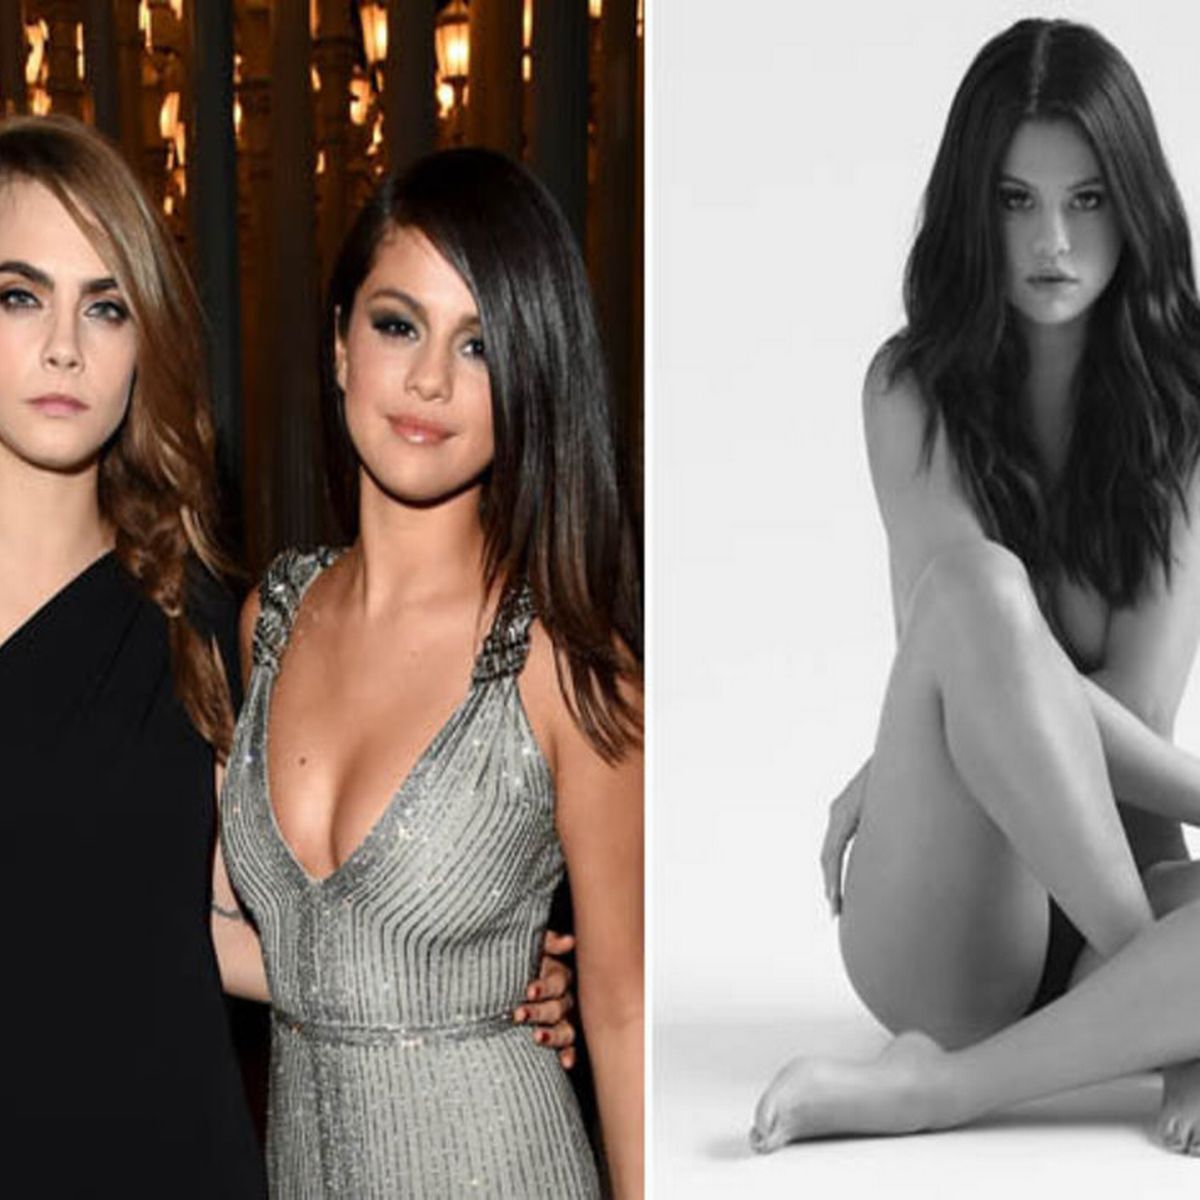 charles froeschle recommends selena gomez naked and having sex pic